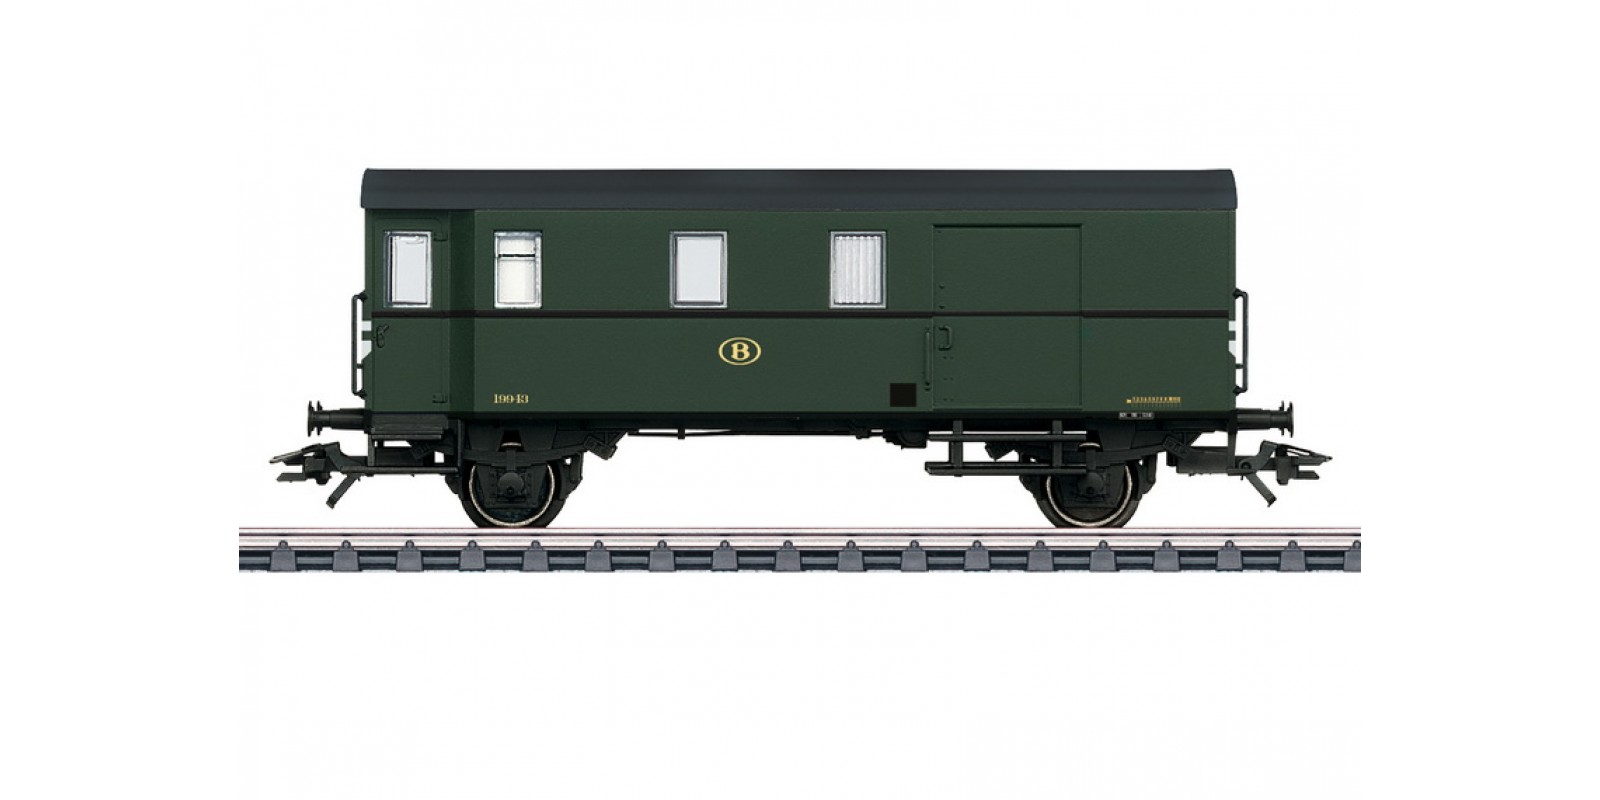 46984 Type Pwgs 41 Freight Train Baggage Car